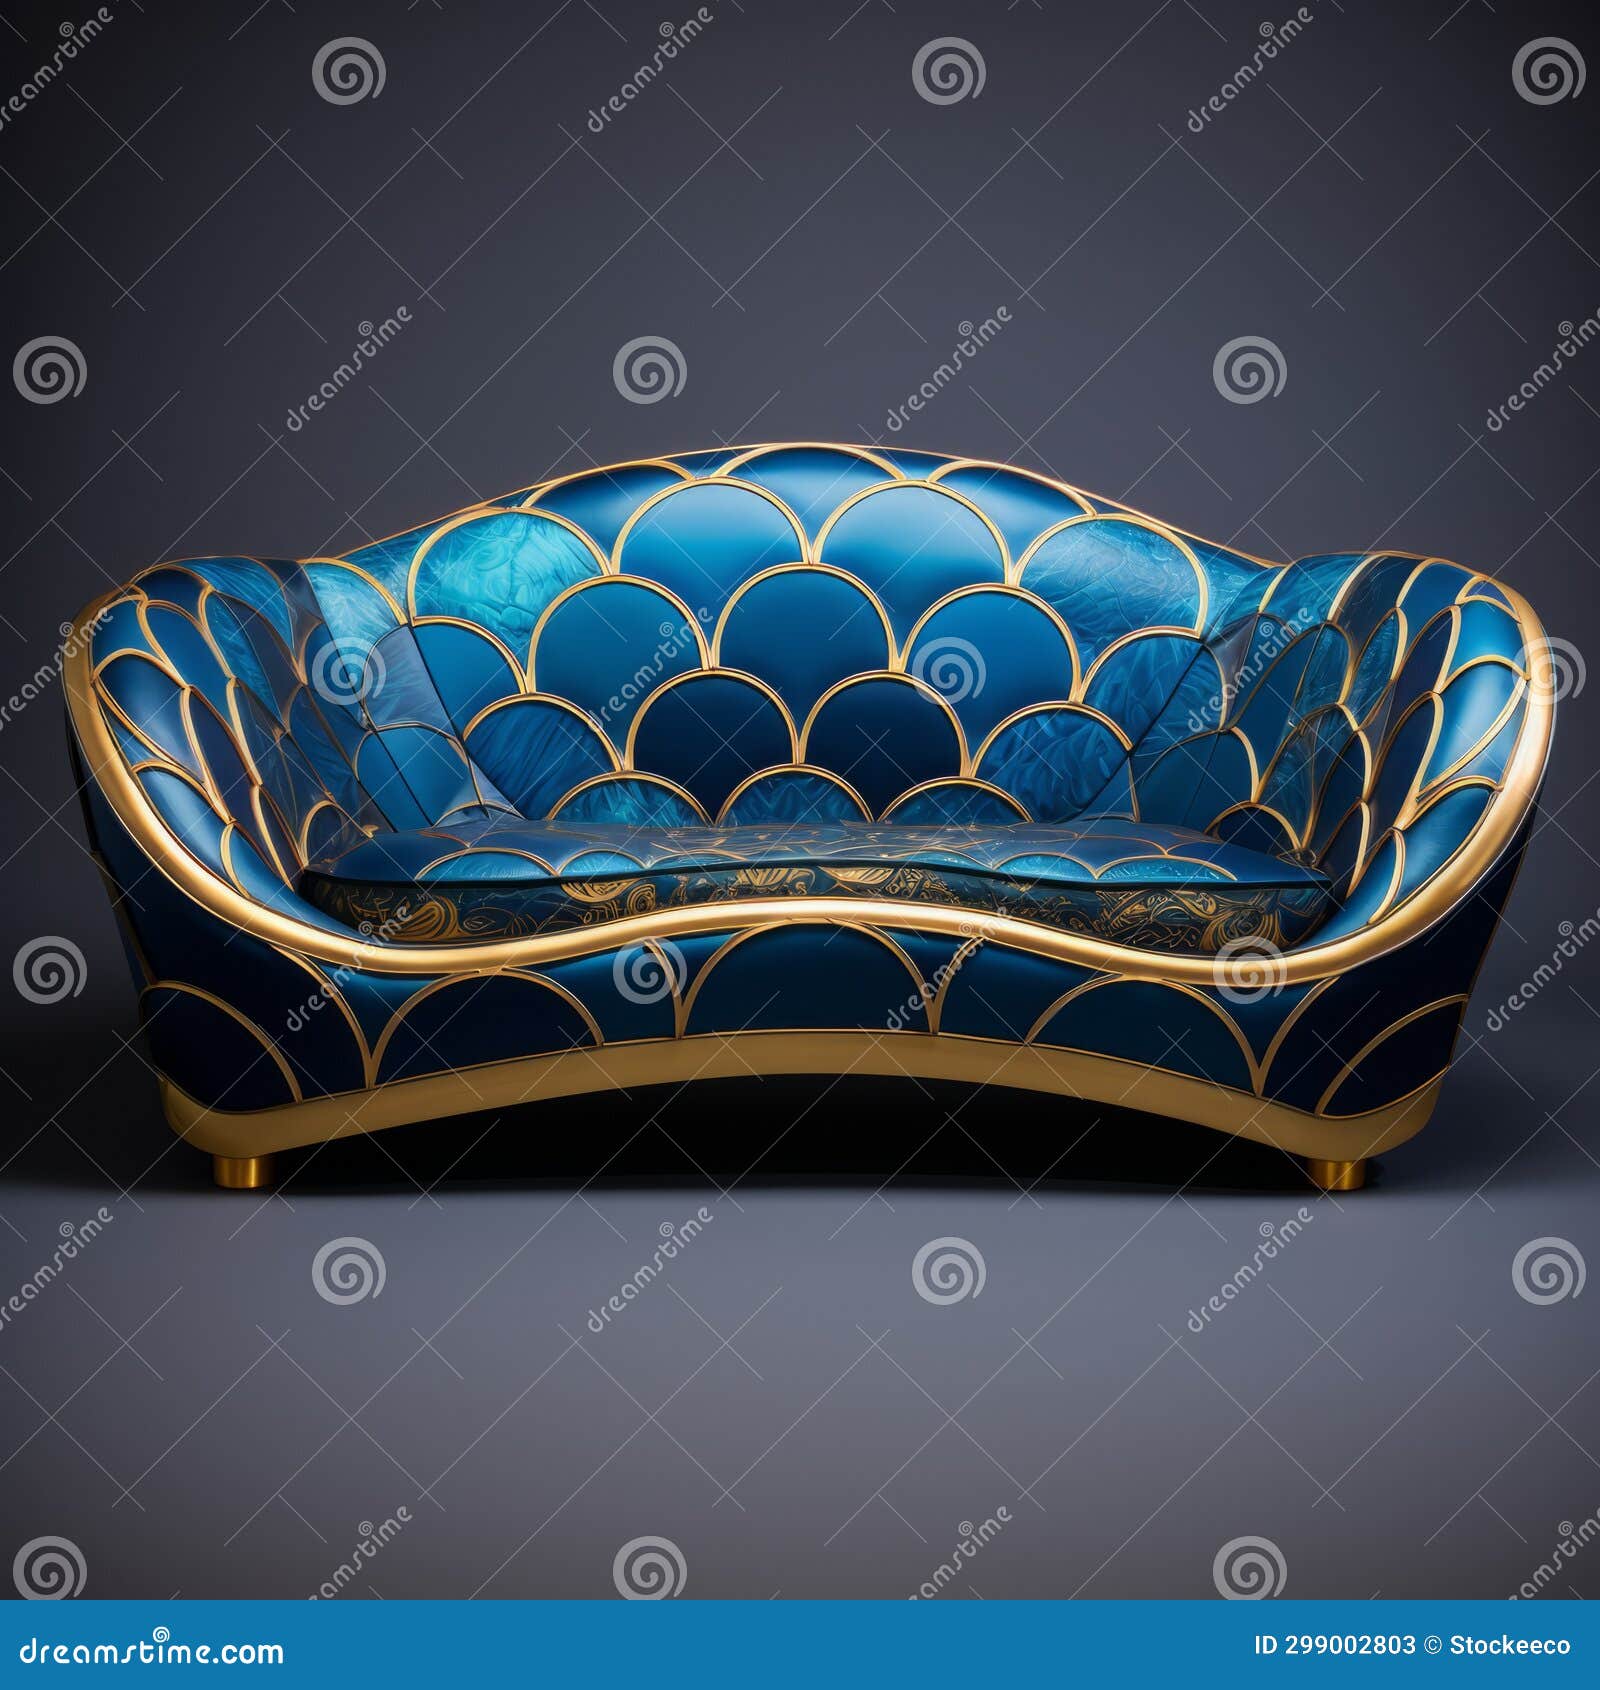 golden leather sofa with blue and gold scalloping